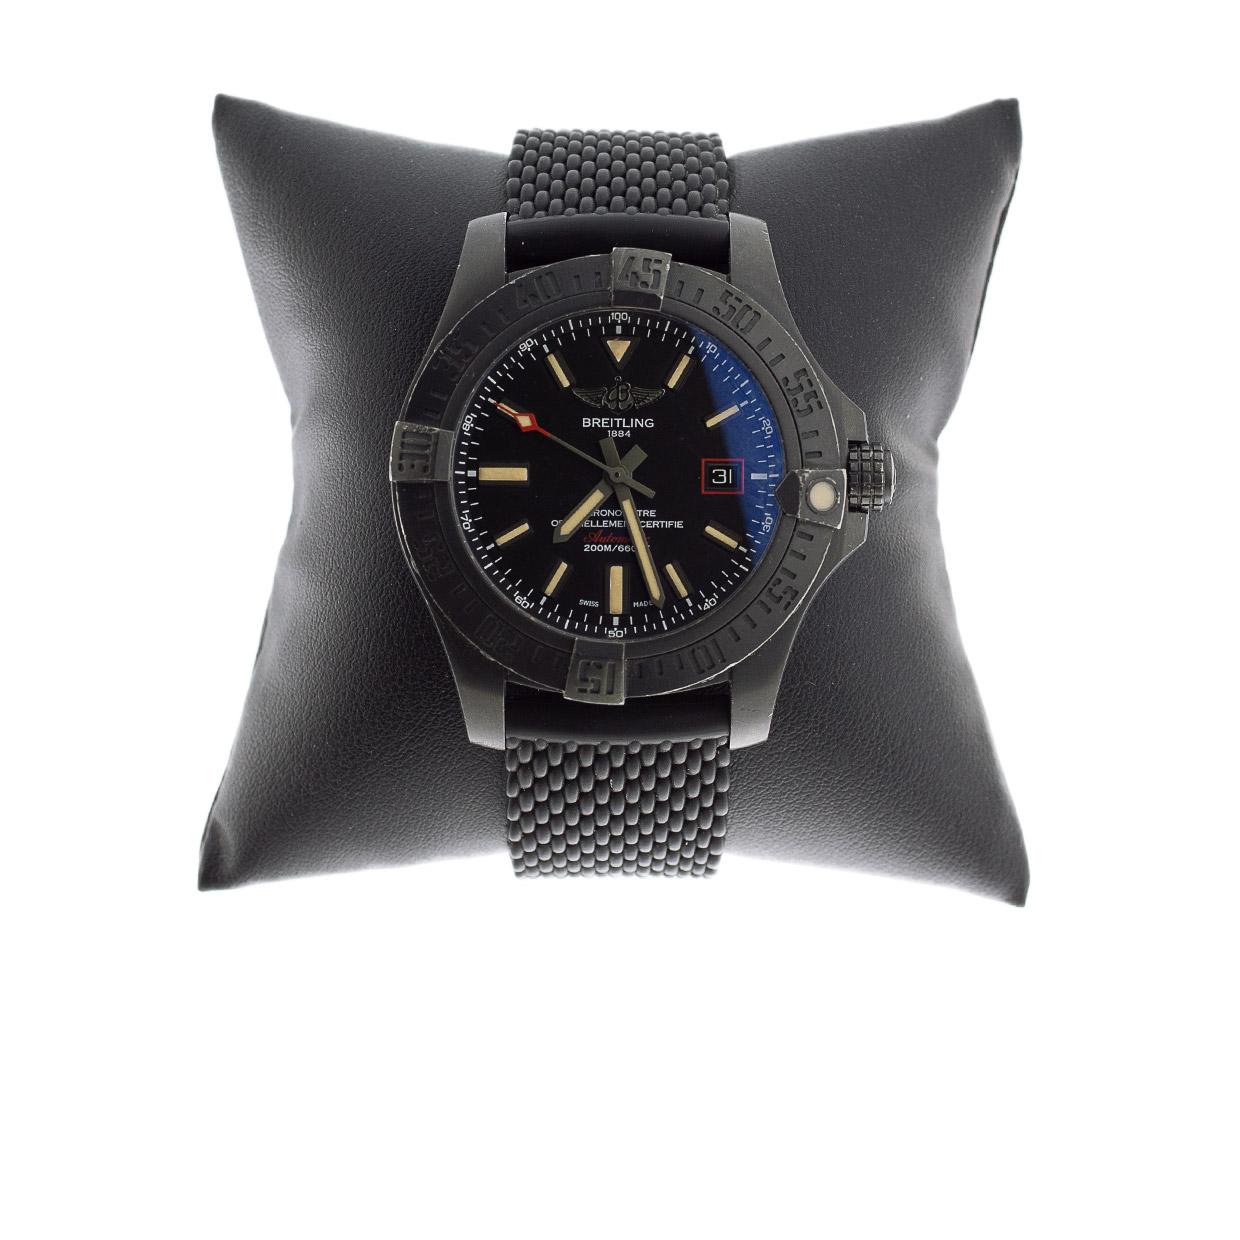 Product Details:
Estimated Retail:  $5,150.00
Condition: Pre Owned
Brand: Breitling
Collection: Avenger
Case Material: Titanium
Gender: Mens
MPN: 1720084
Movement: Mechanical Automatic
Face Color: Black
Band Type: 2pc Strp
Case Size: 48
Style: